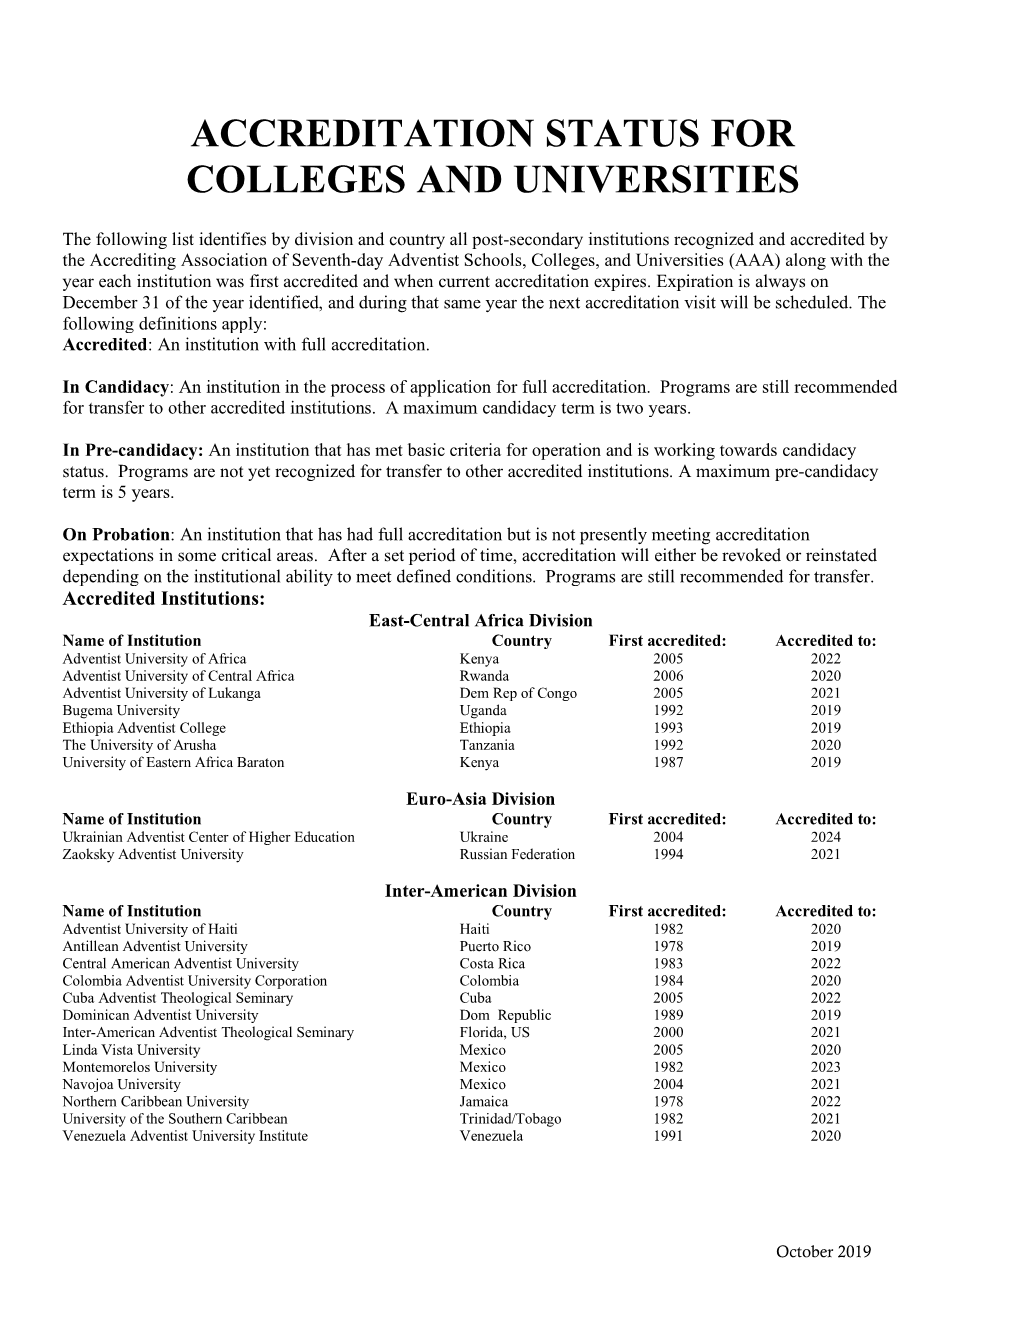 Accreditation Status for Colleges and Universities